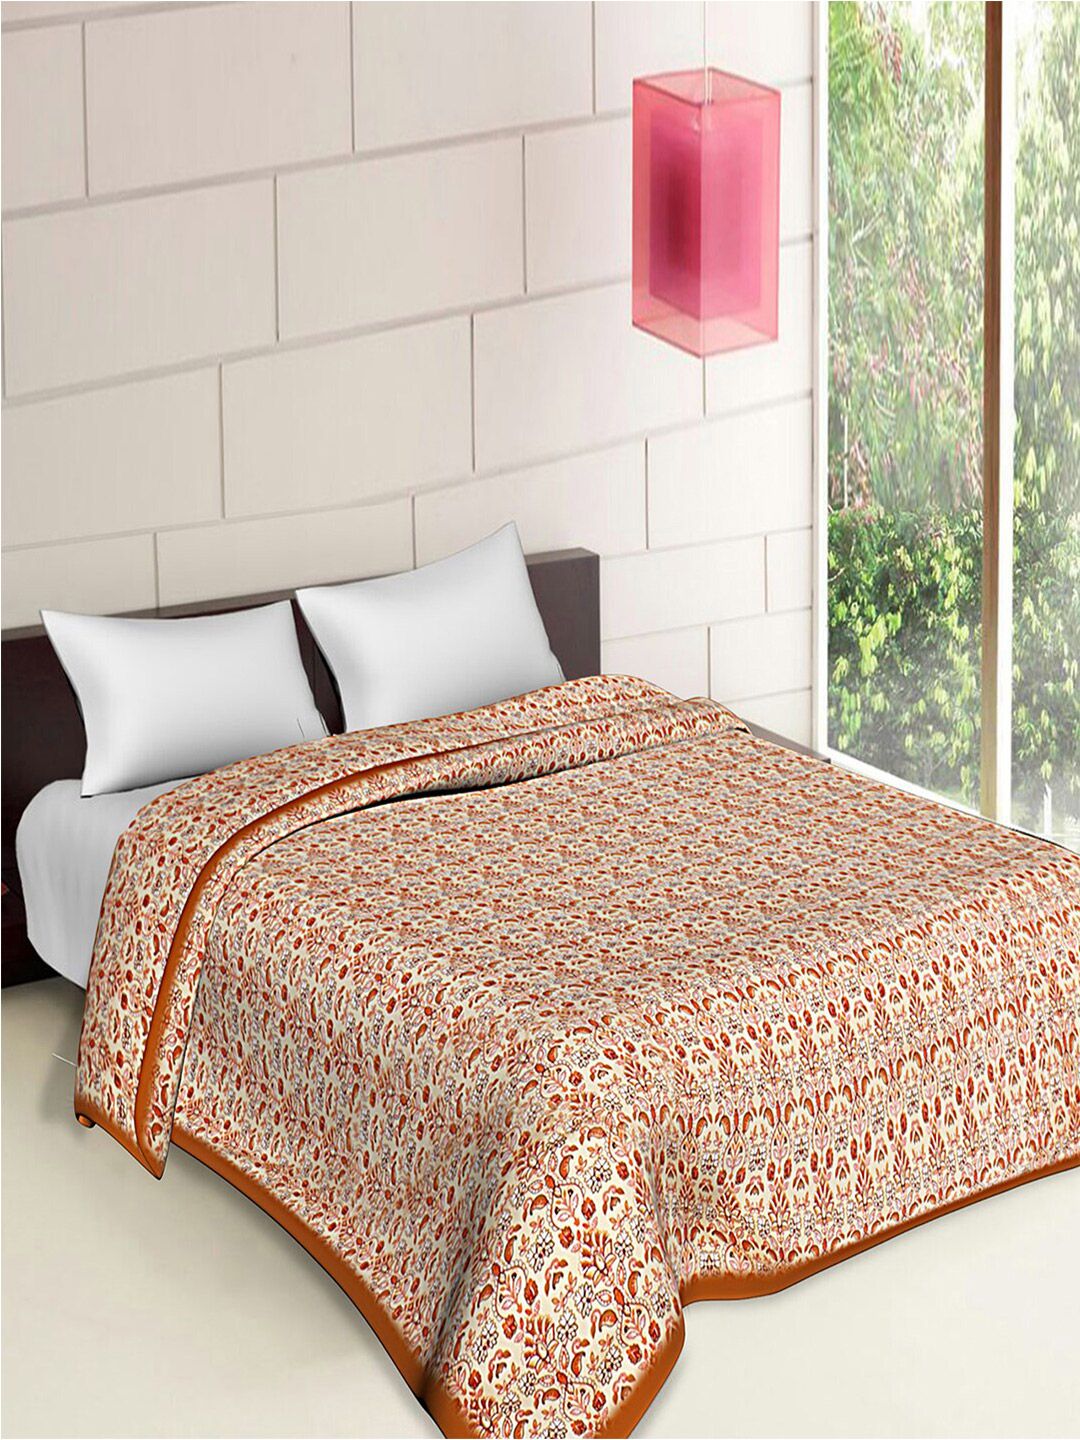 Kuber Industries Cream-Coloured & White Ethnic Motifs AC Room 300 GSM Double Bed Blanket Price in India